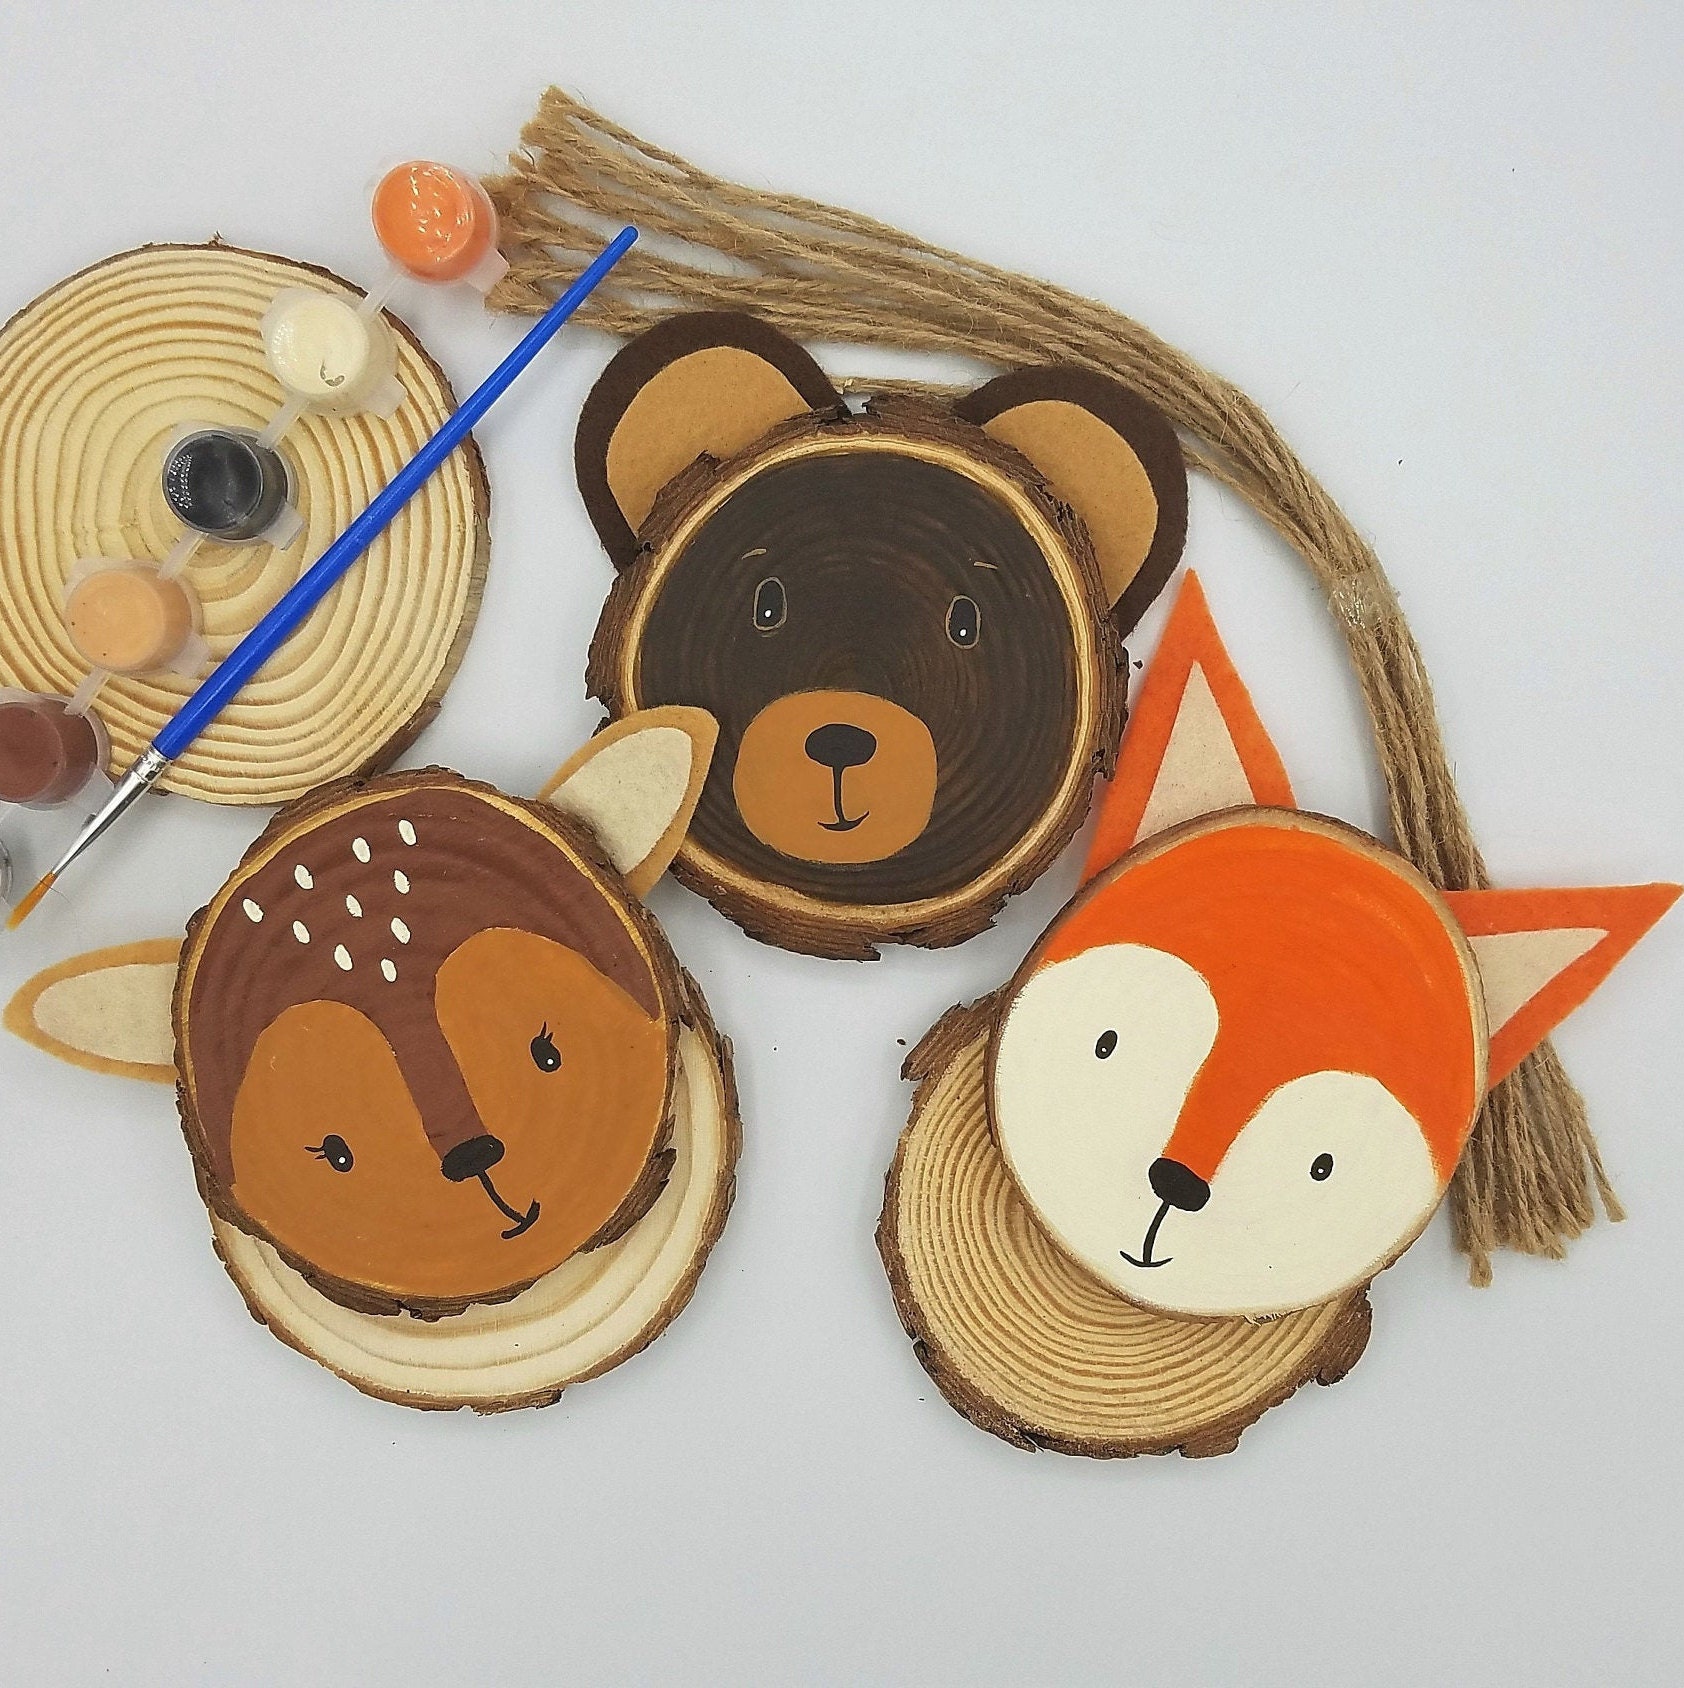 Baker Ross AX182 Woodland Animal Wooden Keyrings - Pack of 10, Color in Woodcraft Kits for Kids Arts and Crafting Activities